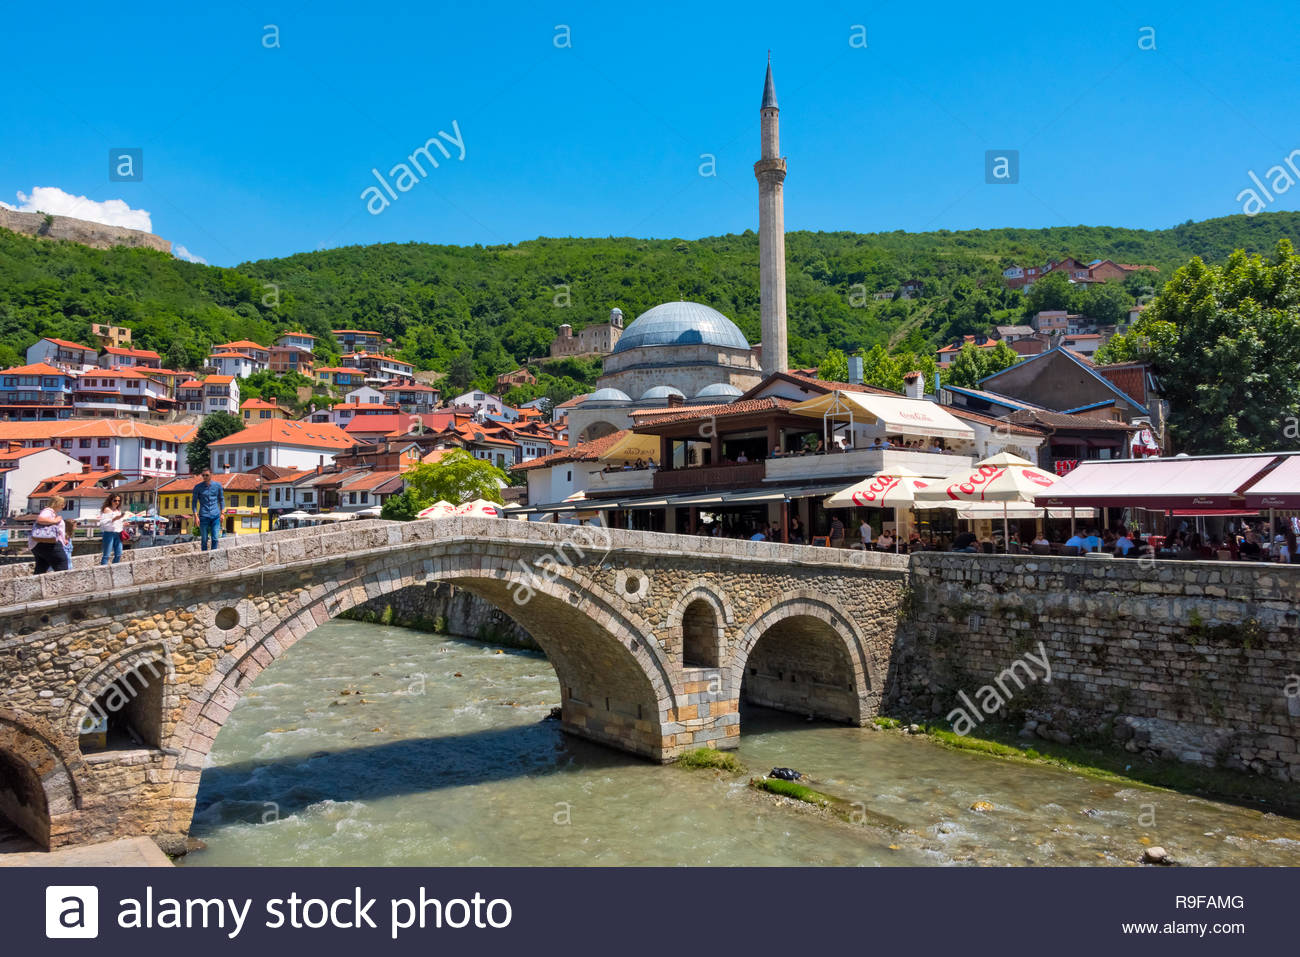 Stone Bridge Sinan Pasha Mosque And Houses In The Old Town On